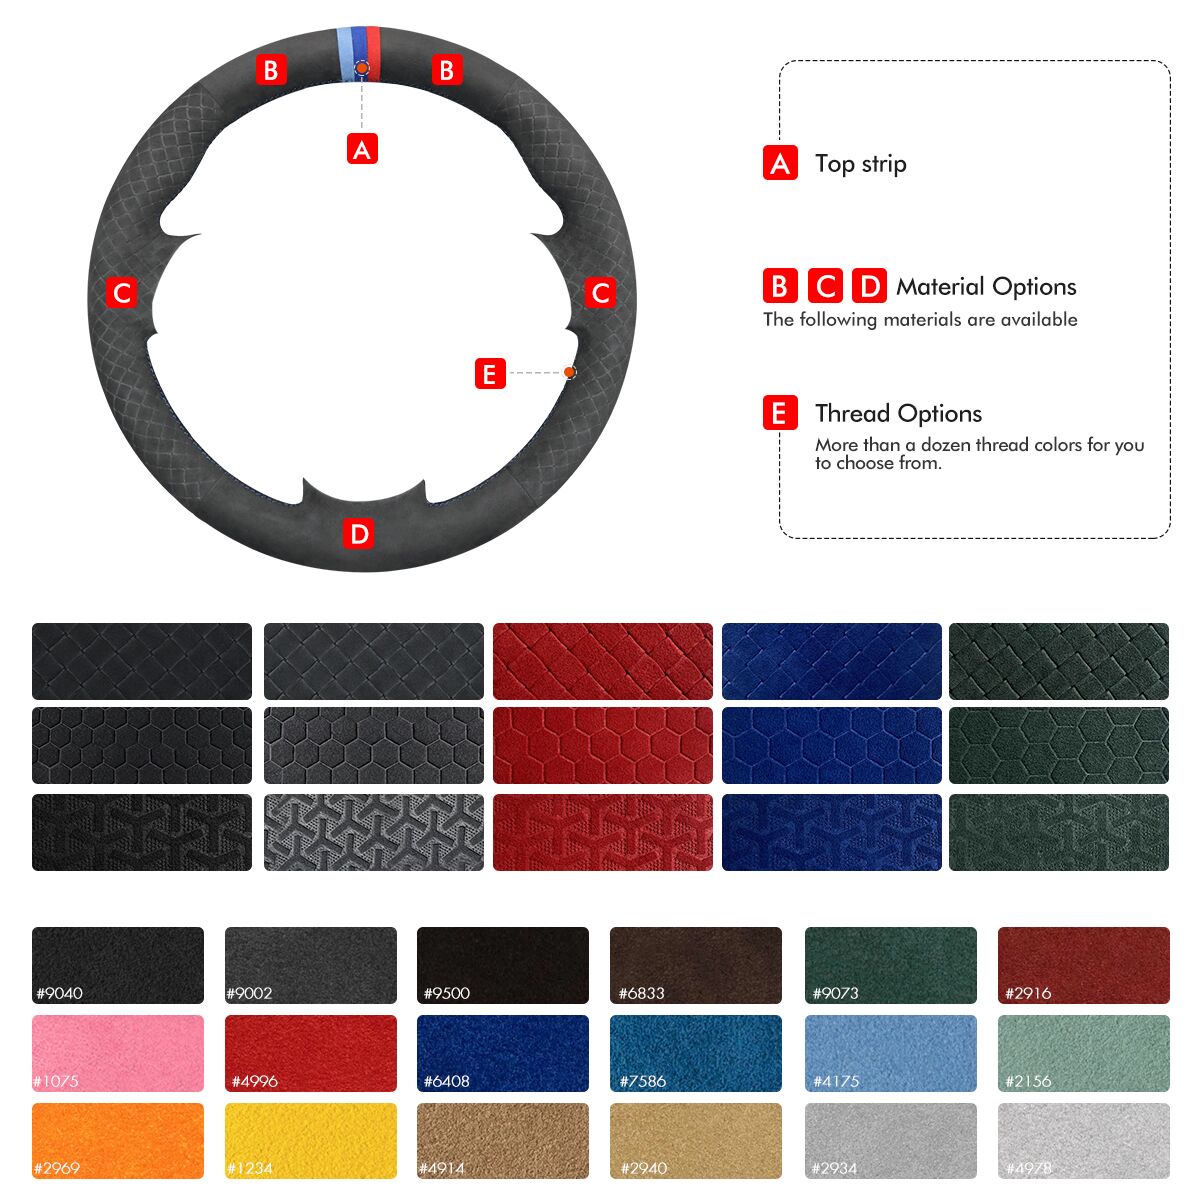 MEWANT DIY Black PU Leather Real Genuine Leather Suede Car Steering Wheel Cover for Volvo S40 2006-2012 / V50 2005-2011 / C30 2009